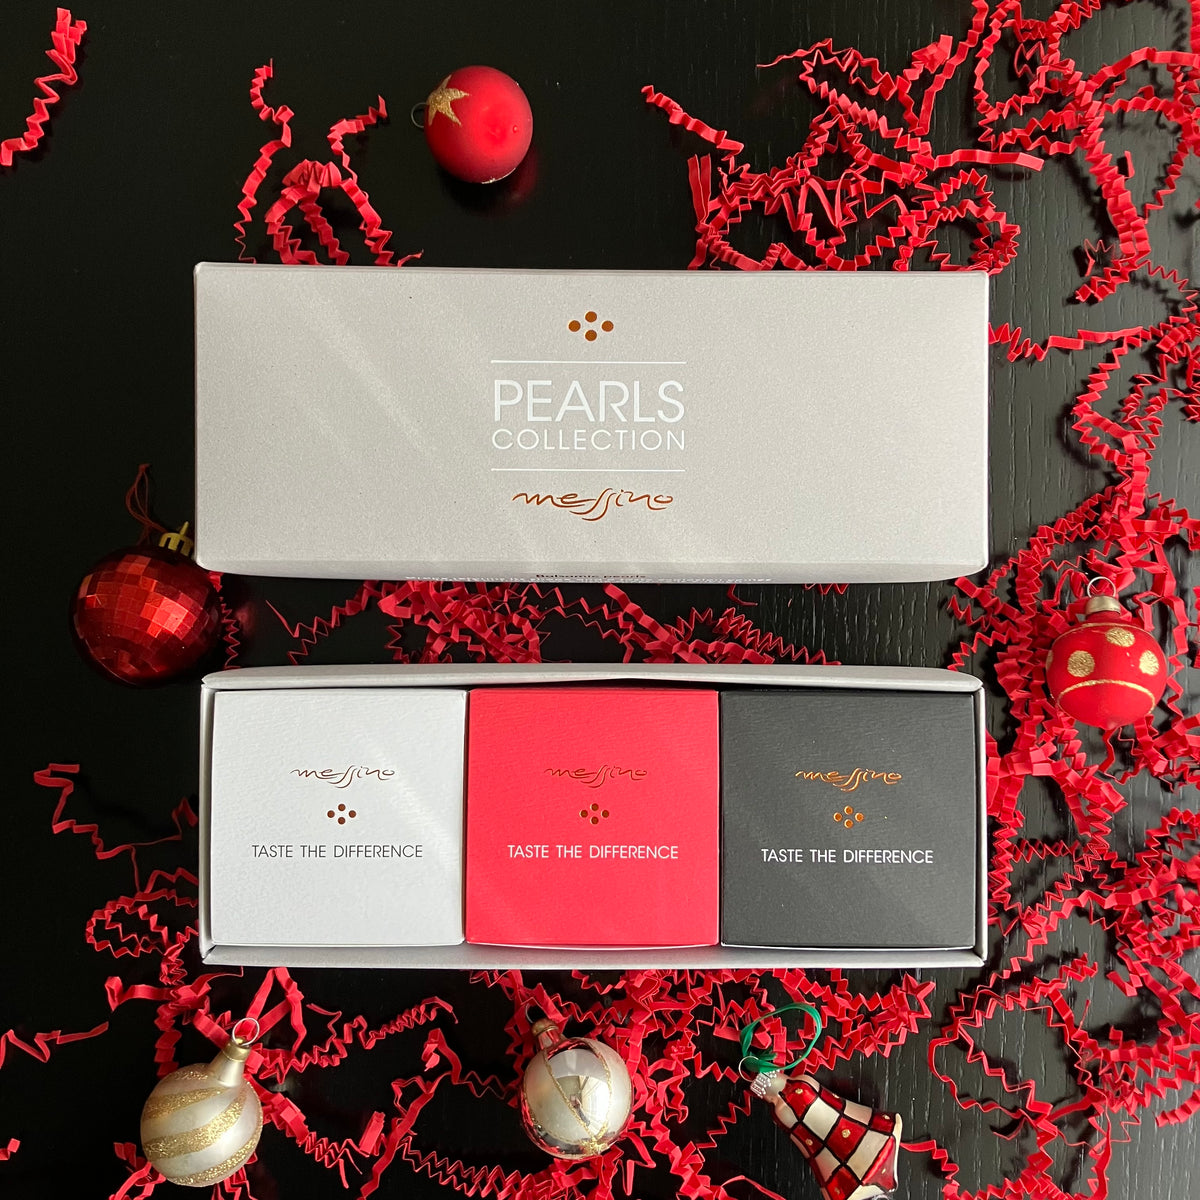 Messino Pearls Collection - Classic Balsamic, White Balsamic and Pomegranate Flavors <br> Price includes shipping